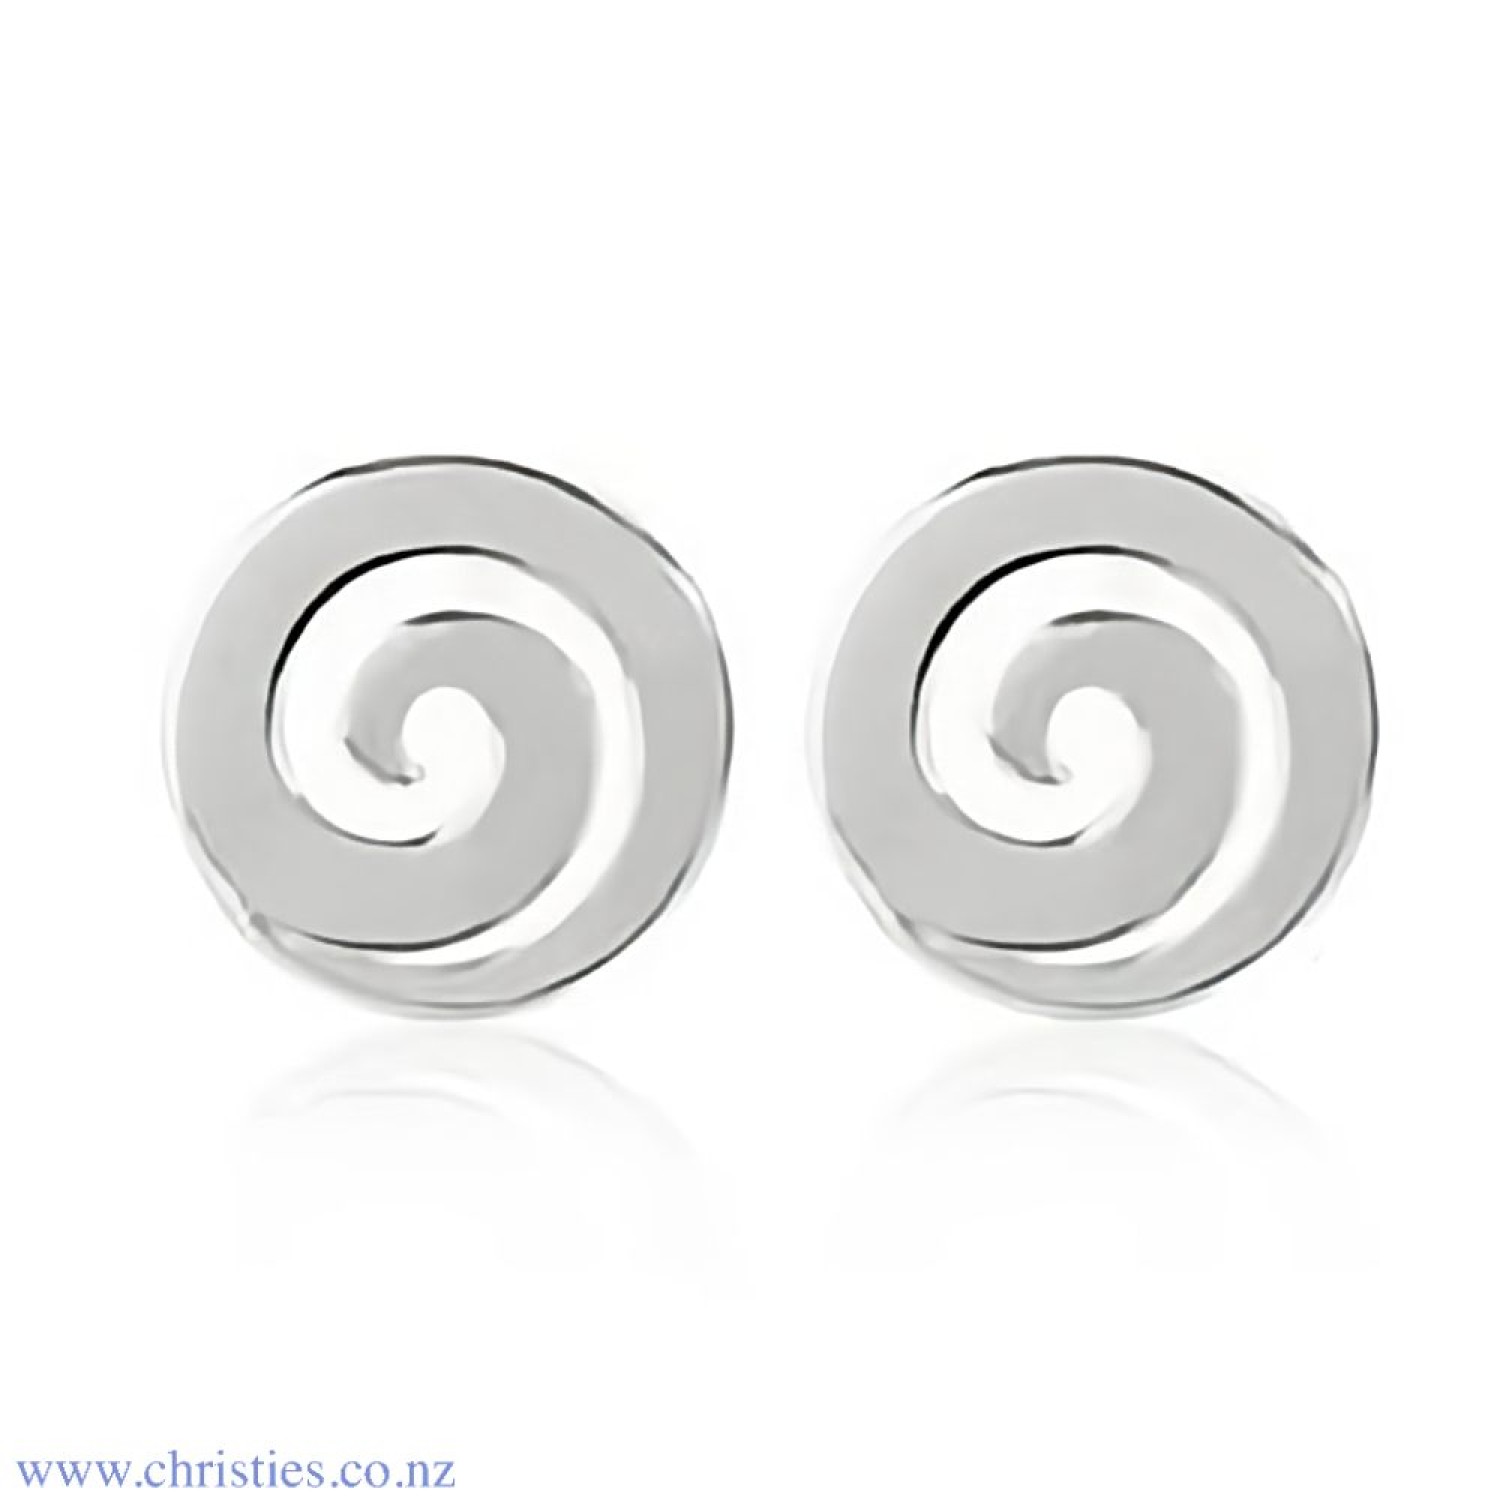 3E40021 Evolve Koru Studs. Steeped in Maori tradition, the koru is a symbol of growth and harmony. The wearing of these earrings serves as a constant reminder to accept opportunities for change and growth, to understand that although we may face c @christ